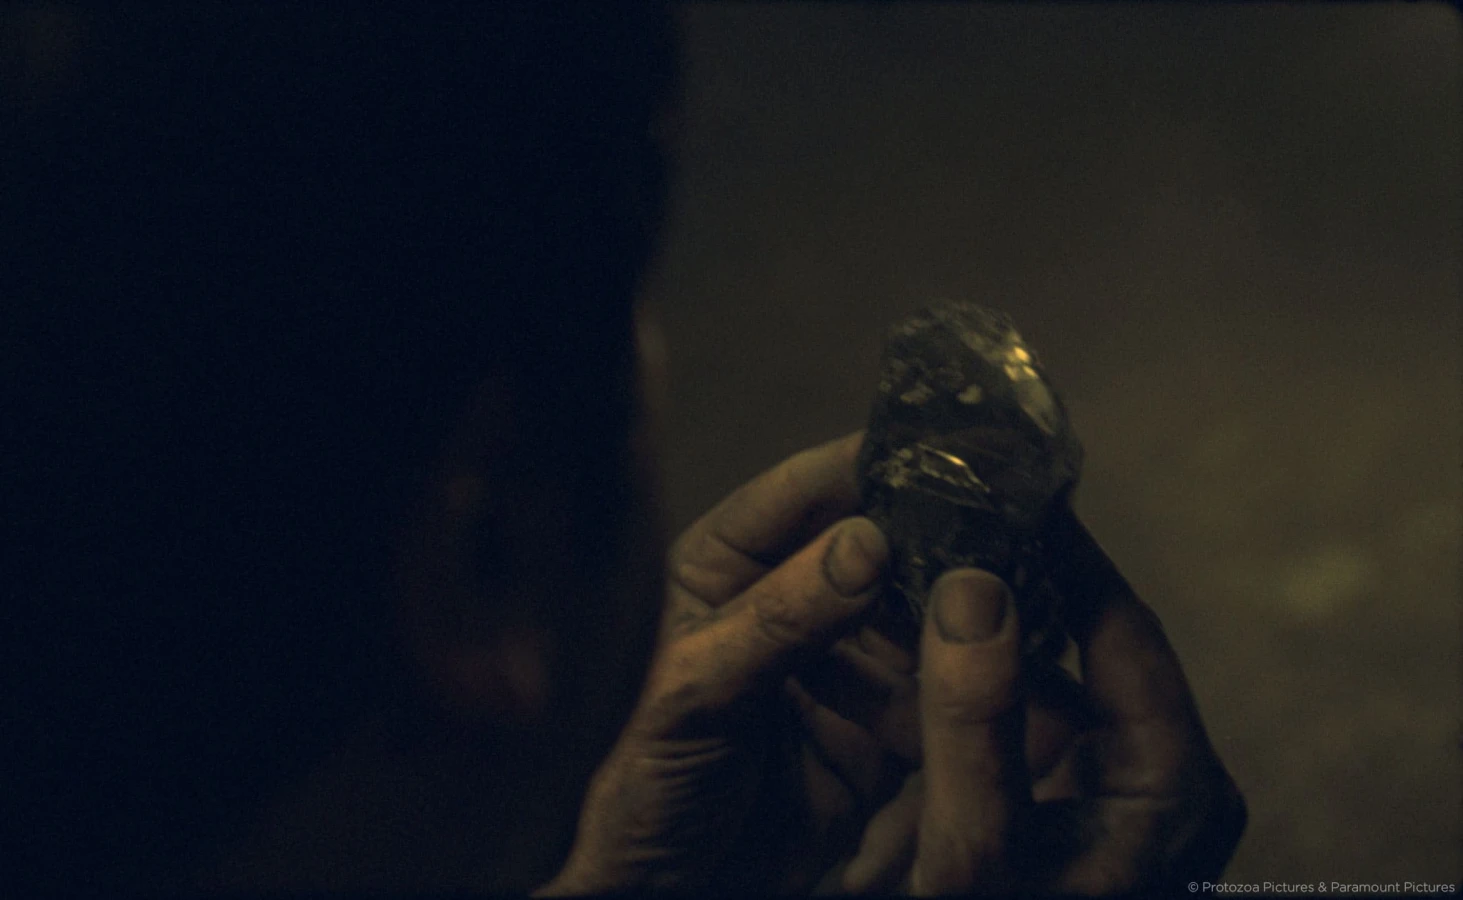  Mother! shot of the cristal diamond hold in hands from Raynault vfx 